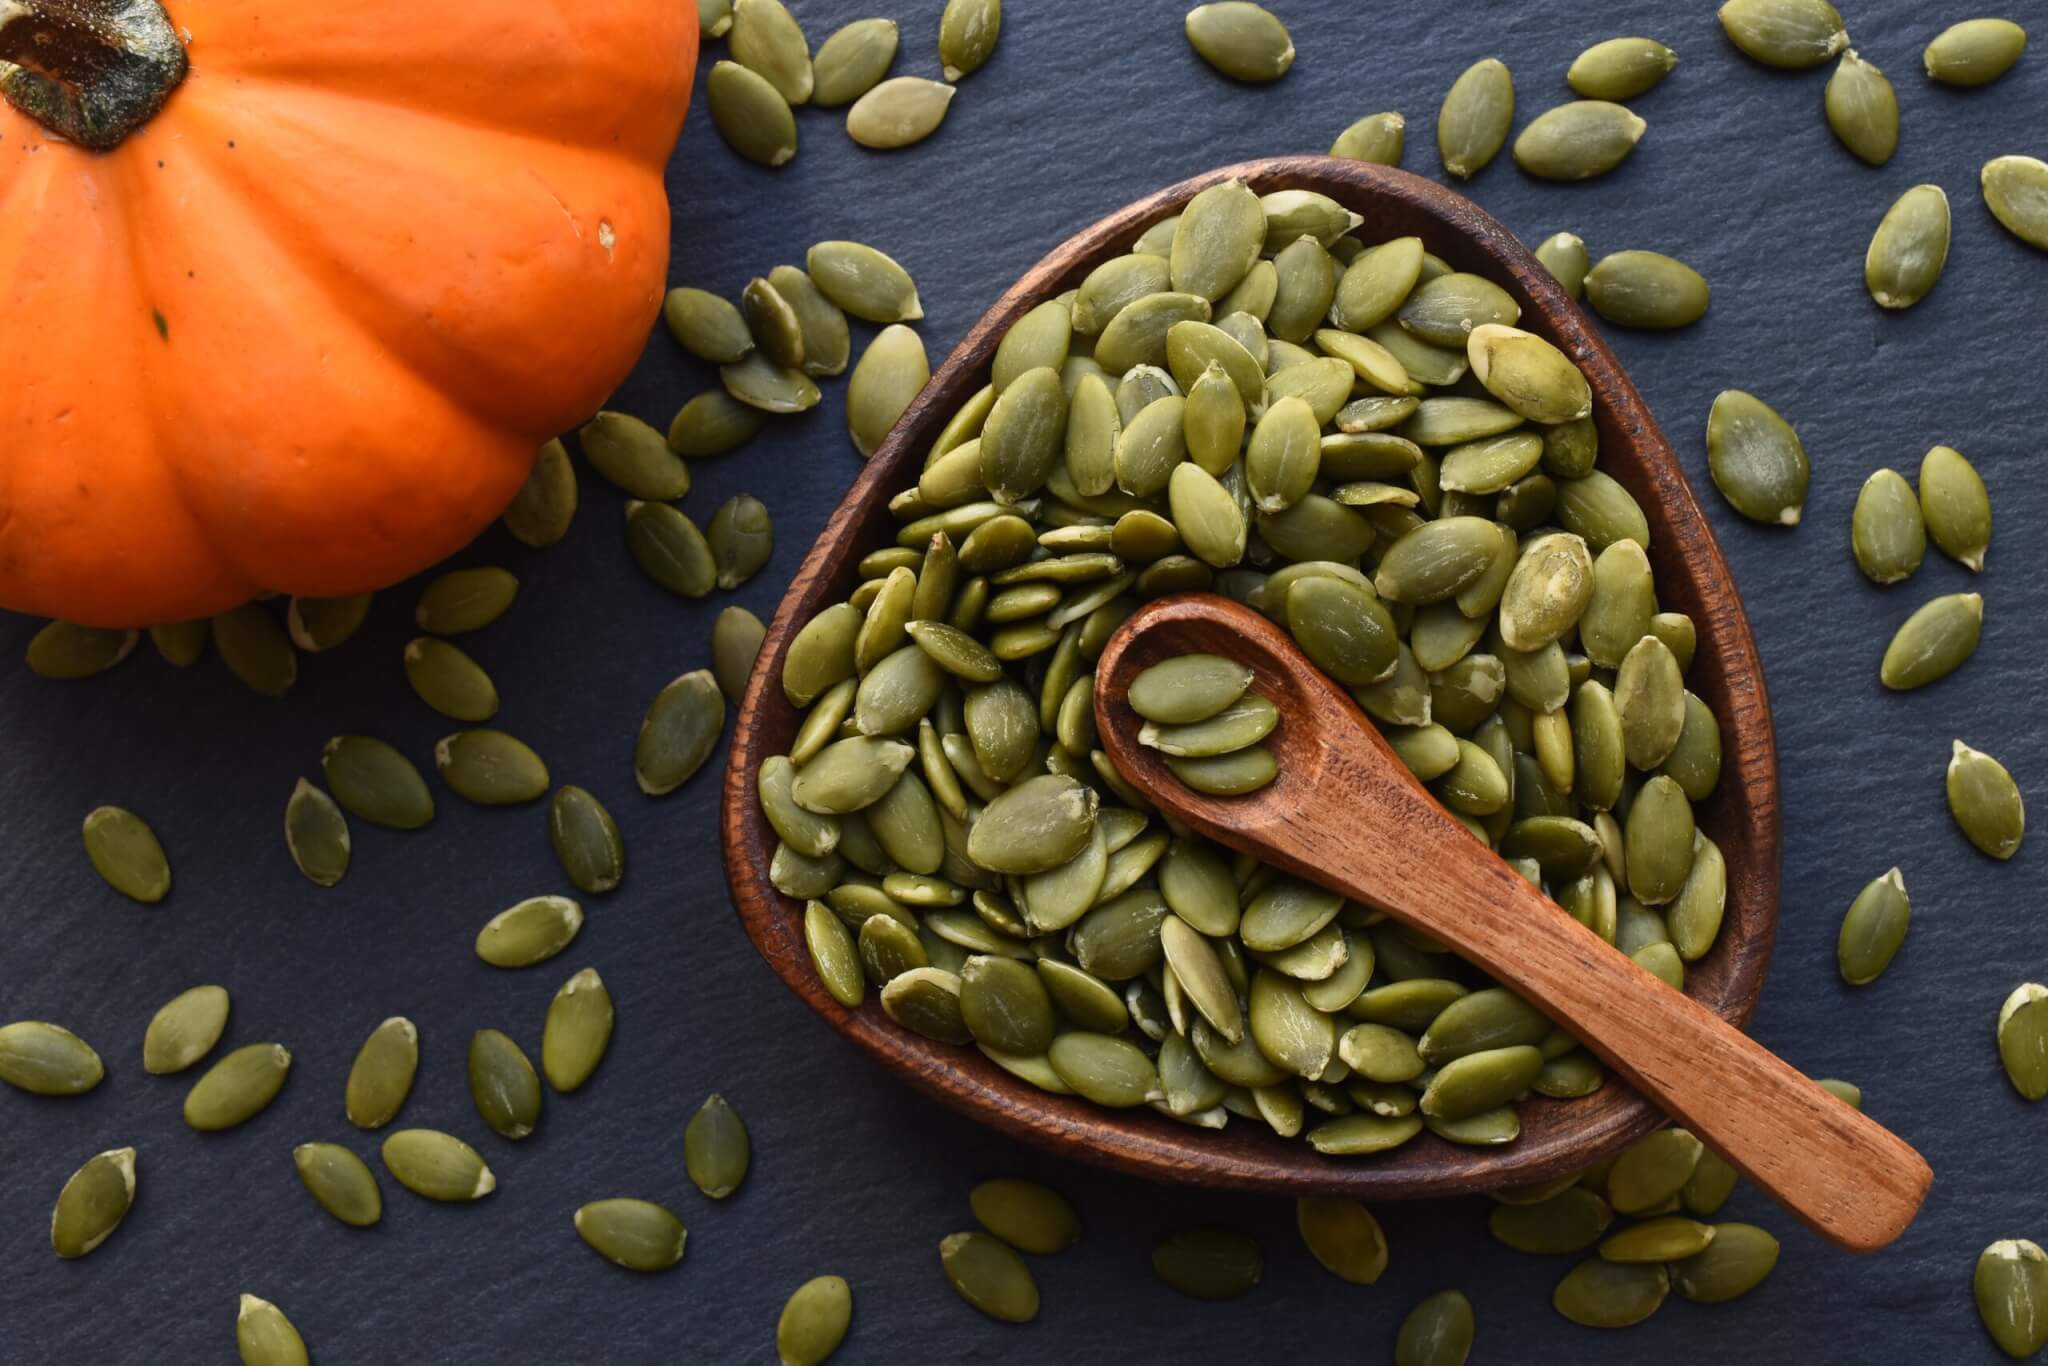 How Long Does It Take For Pumpkin Seeds To Kill Parasites In Dogs